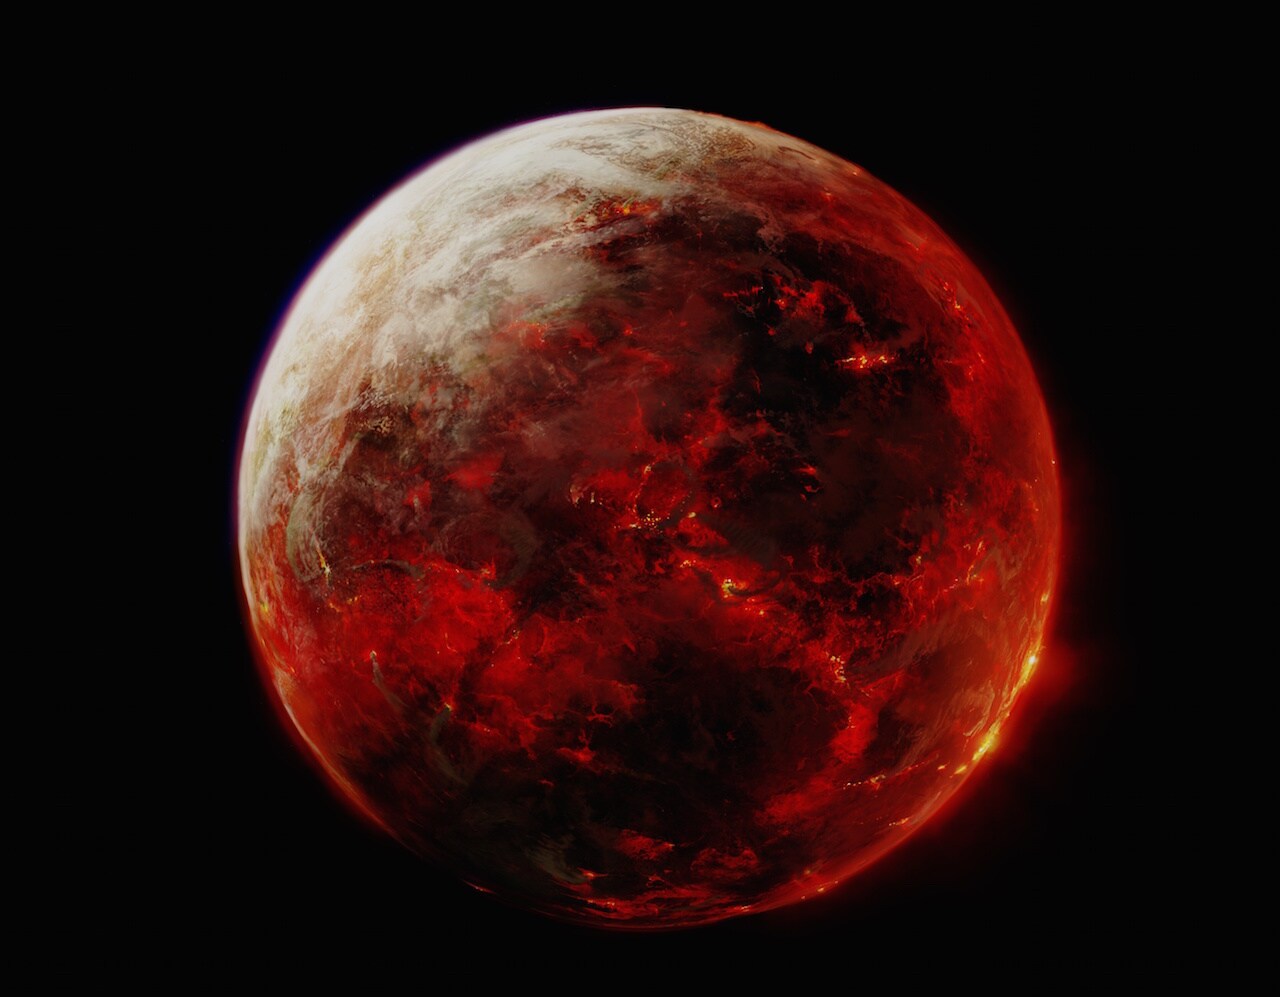 Mustafar was a molten Outer Rim planet known mostly for its lava mining. But its harsh conditions...